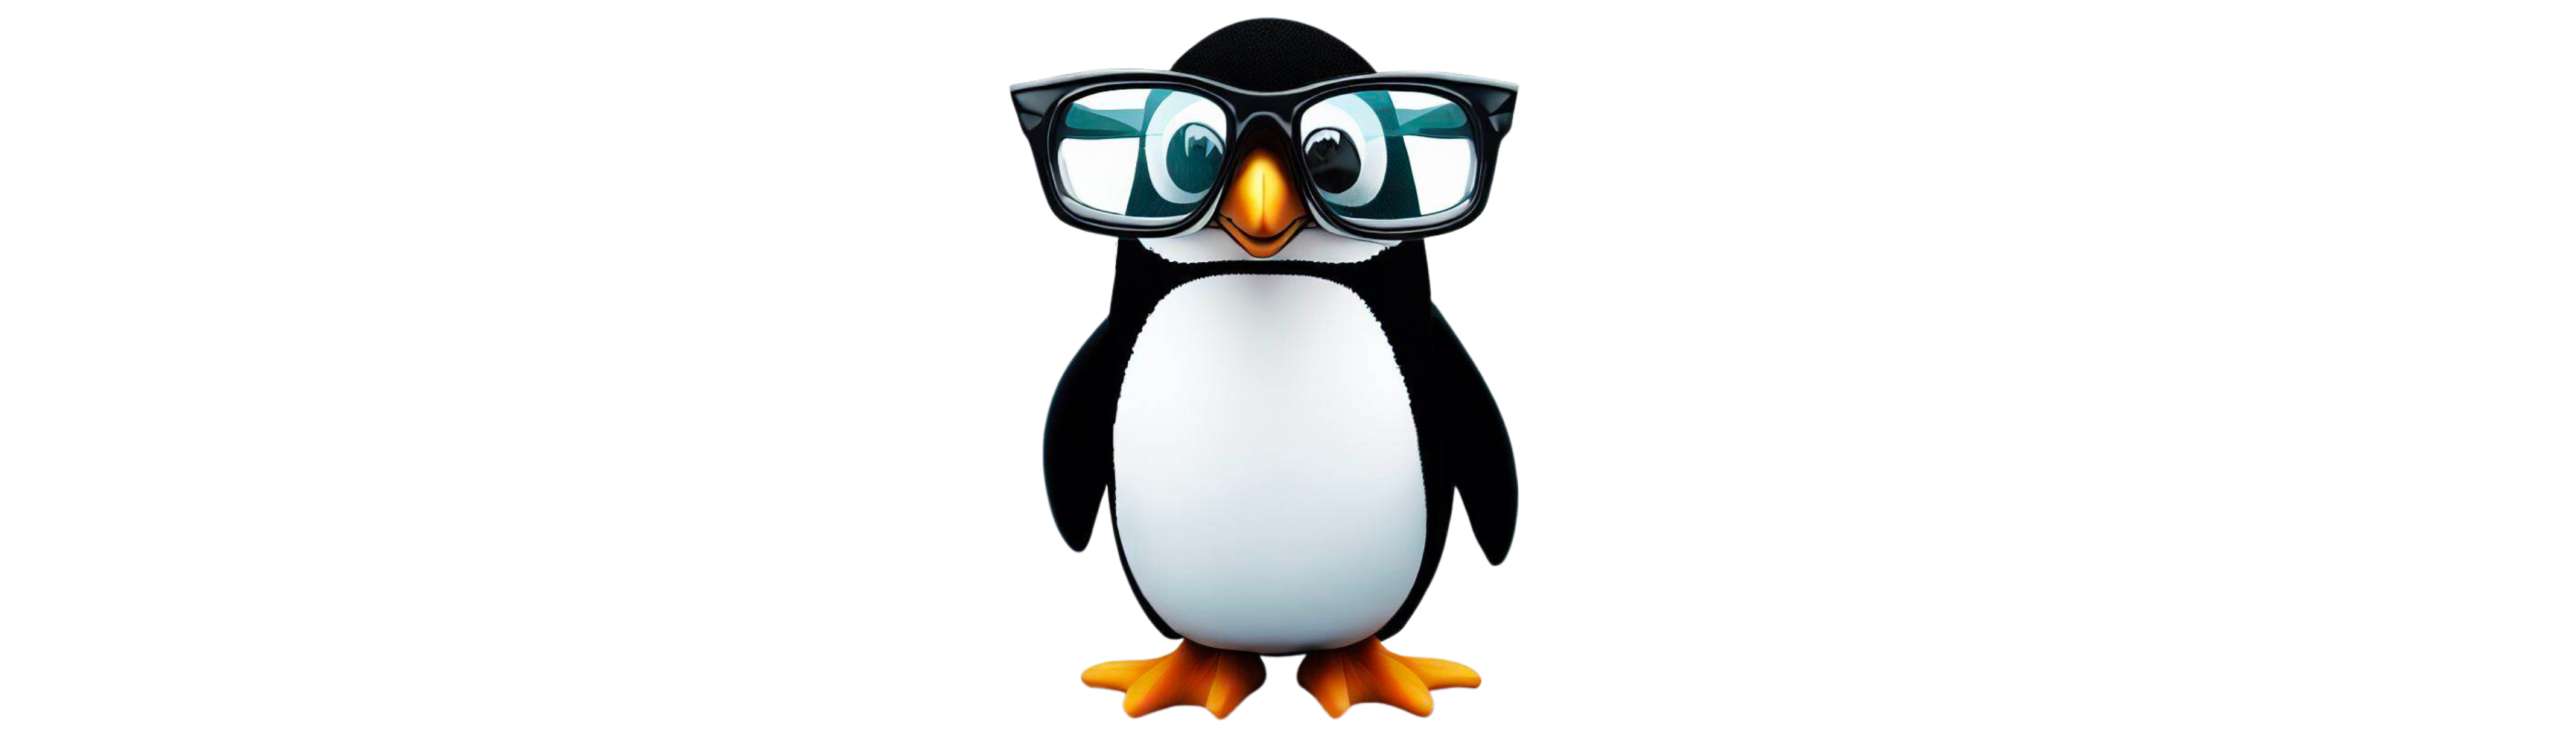 Linux Penguin with Glasses